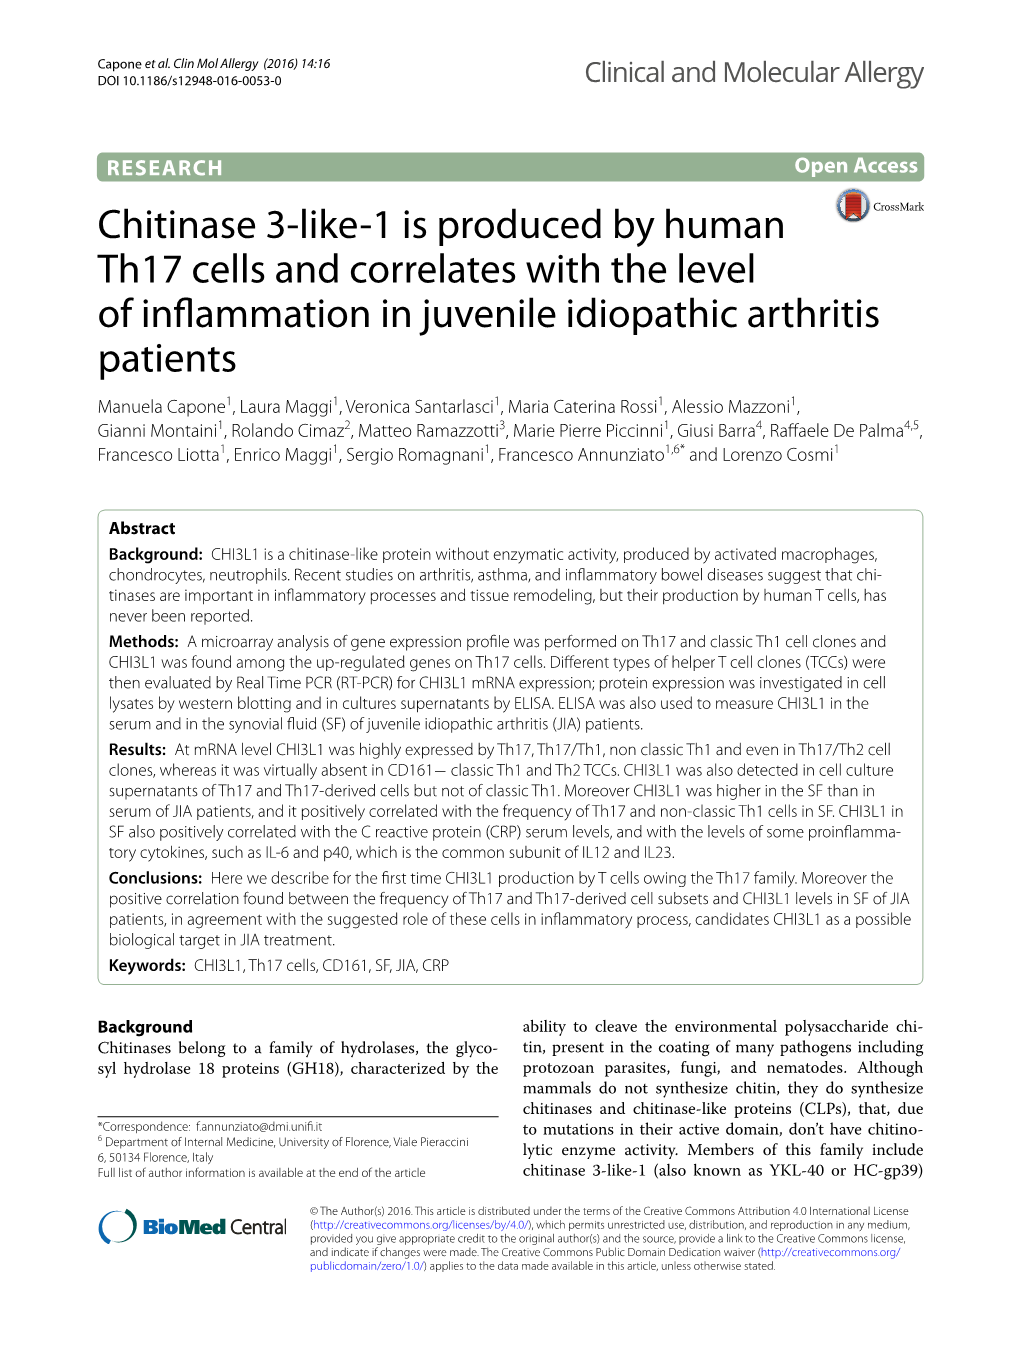 Chitinase 3-Like-1 Is Produced by Human Th17 Cells and Correlates